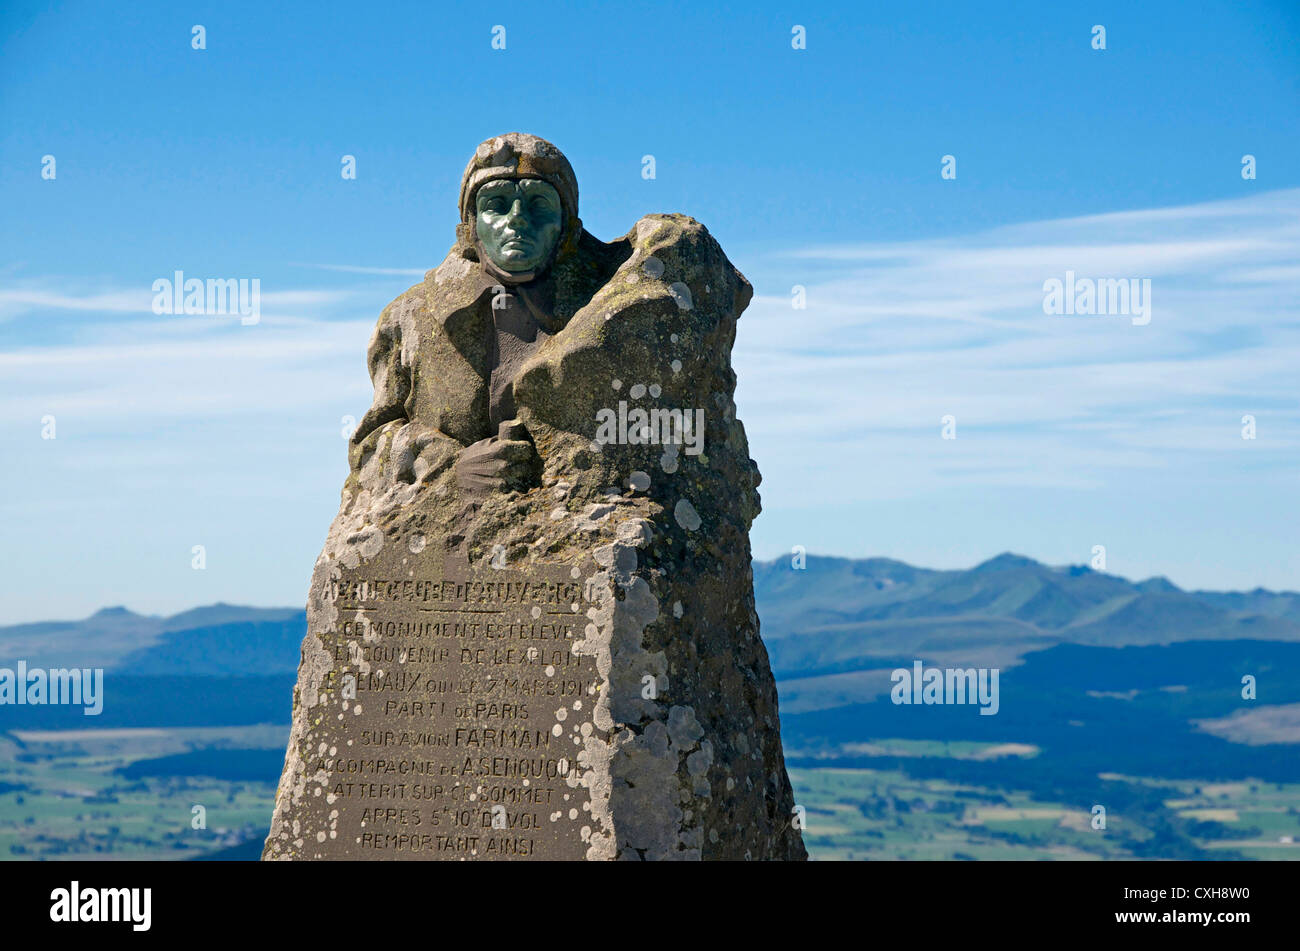 Monument to pioneer aviator Eugene Renaux at summit of Puy de Dome, Central France Stock Photo